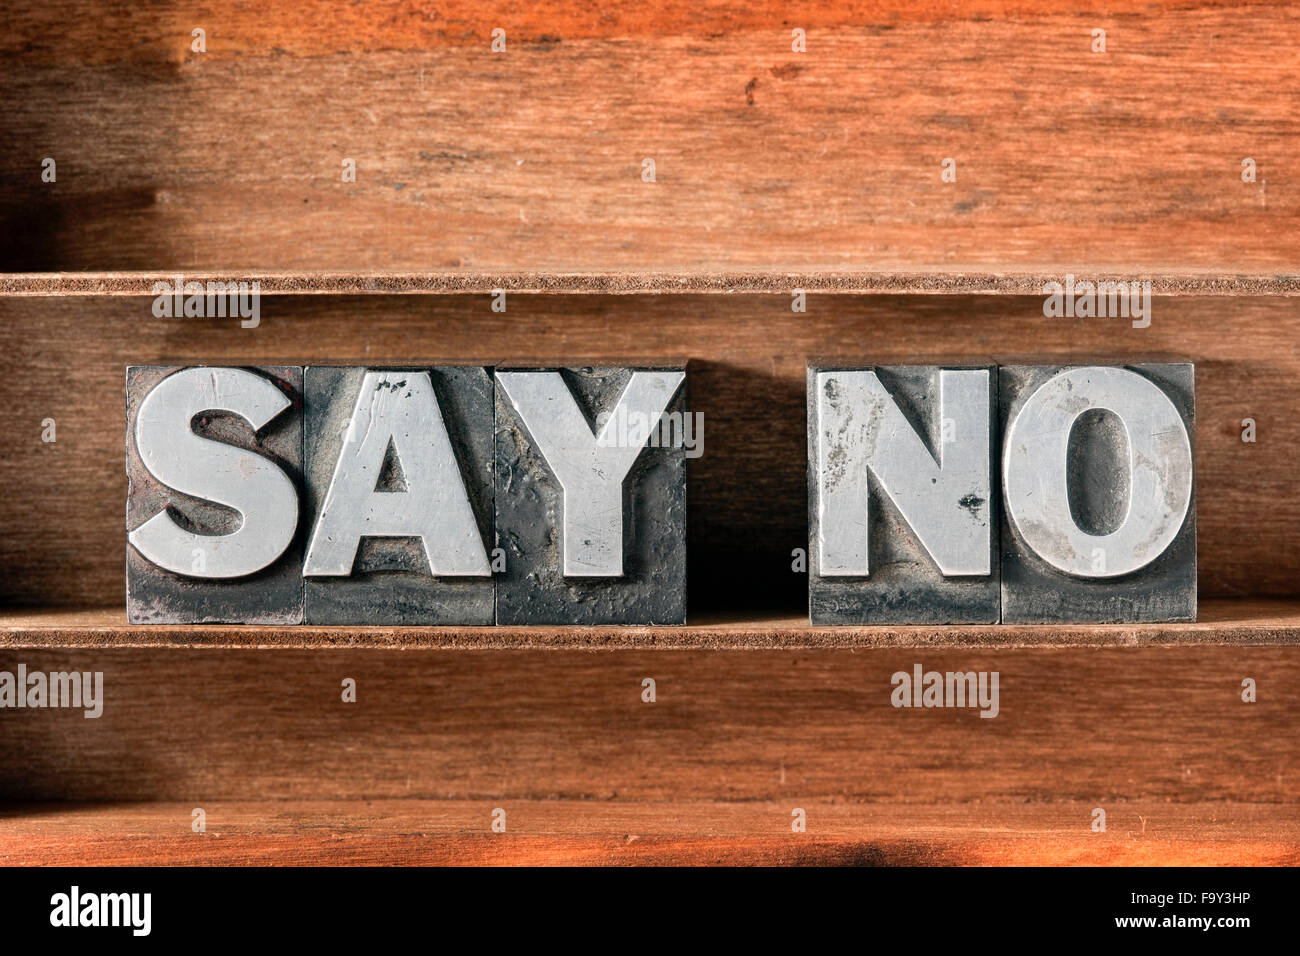 say no phrase made from metallic letterpress type on wooden tray Stock Photo